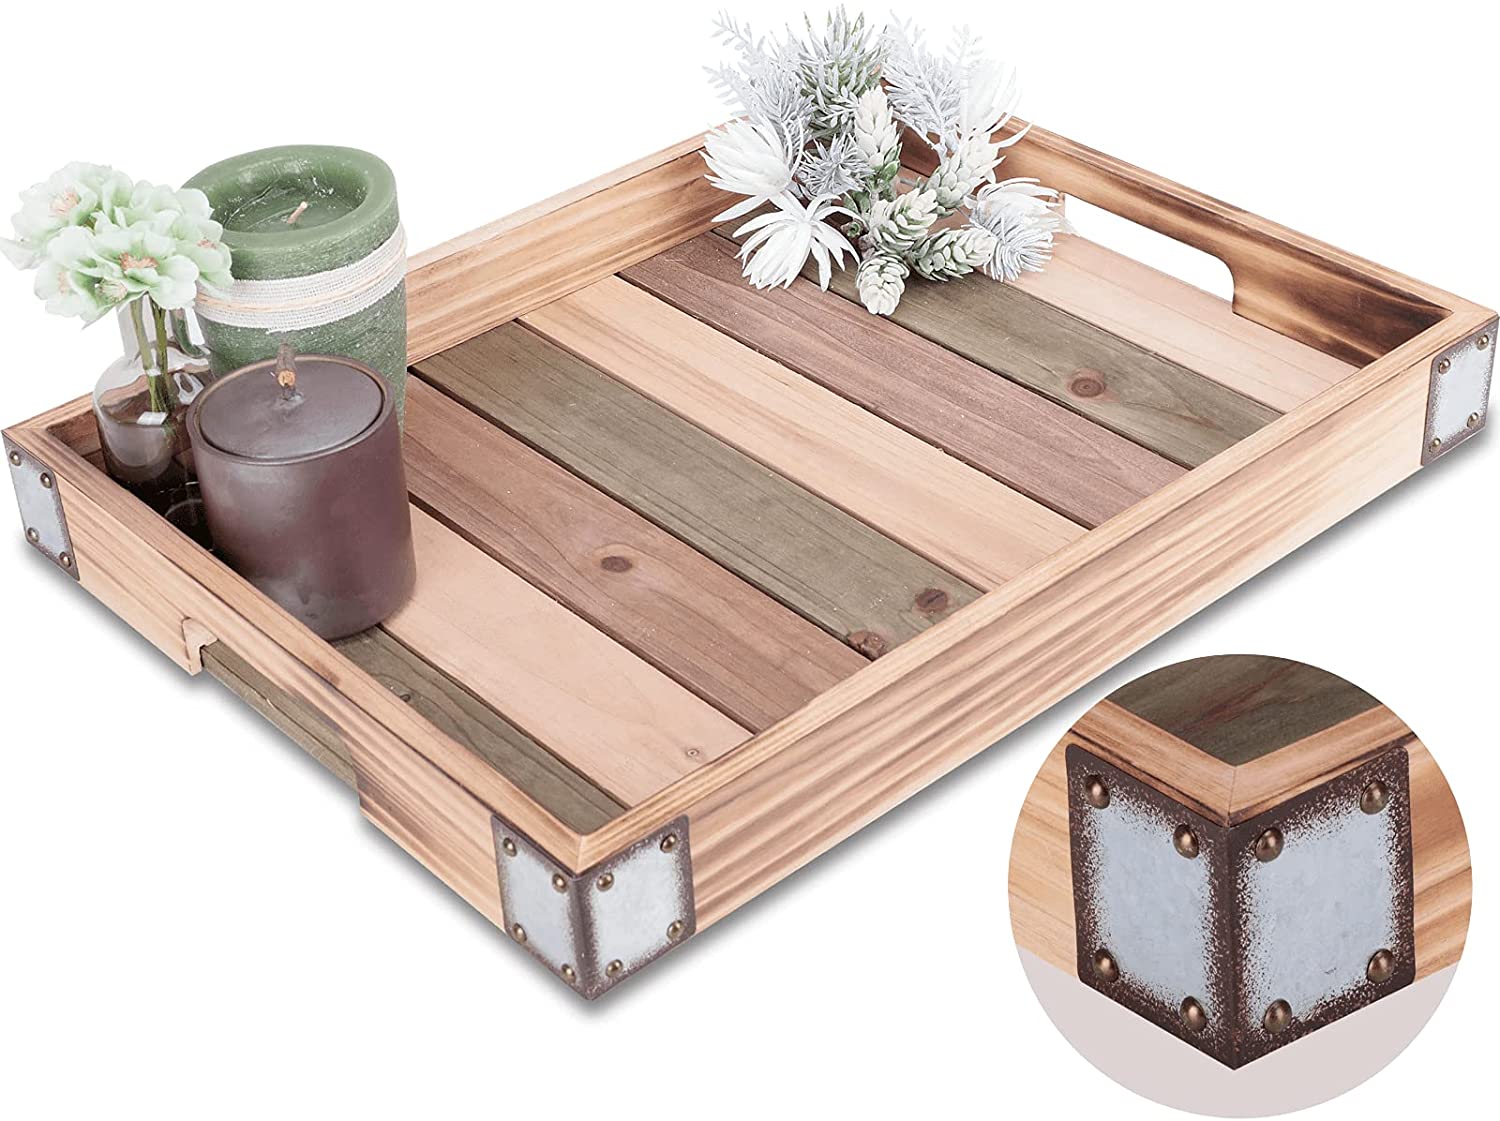 10. Wood Rustic Decorative Coffee Table Tray 